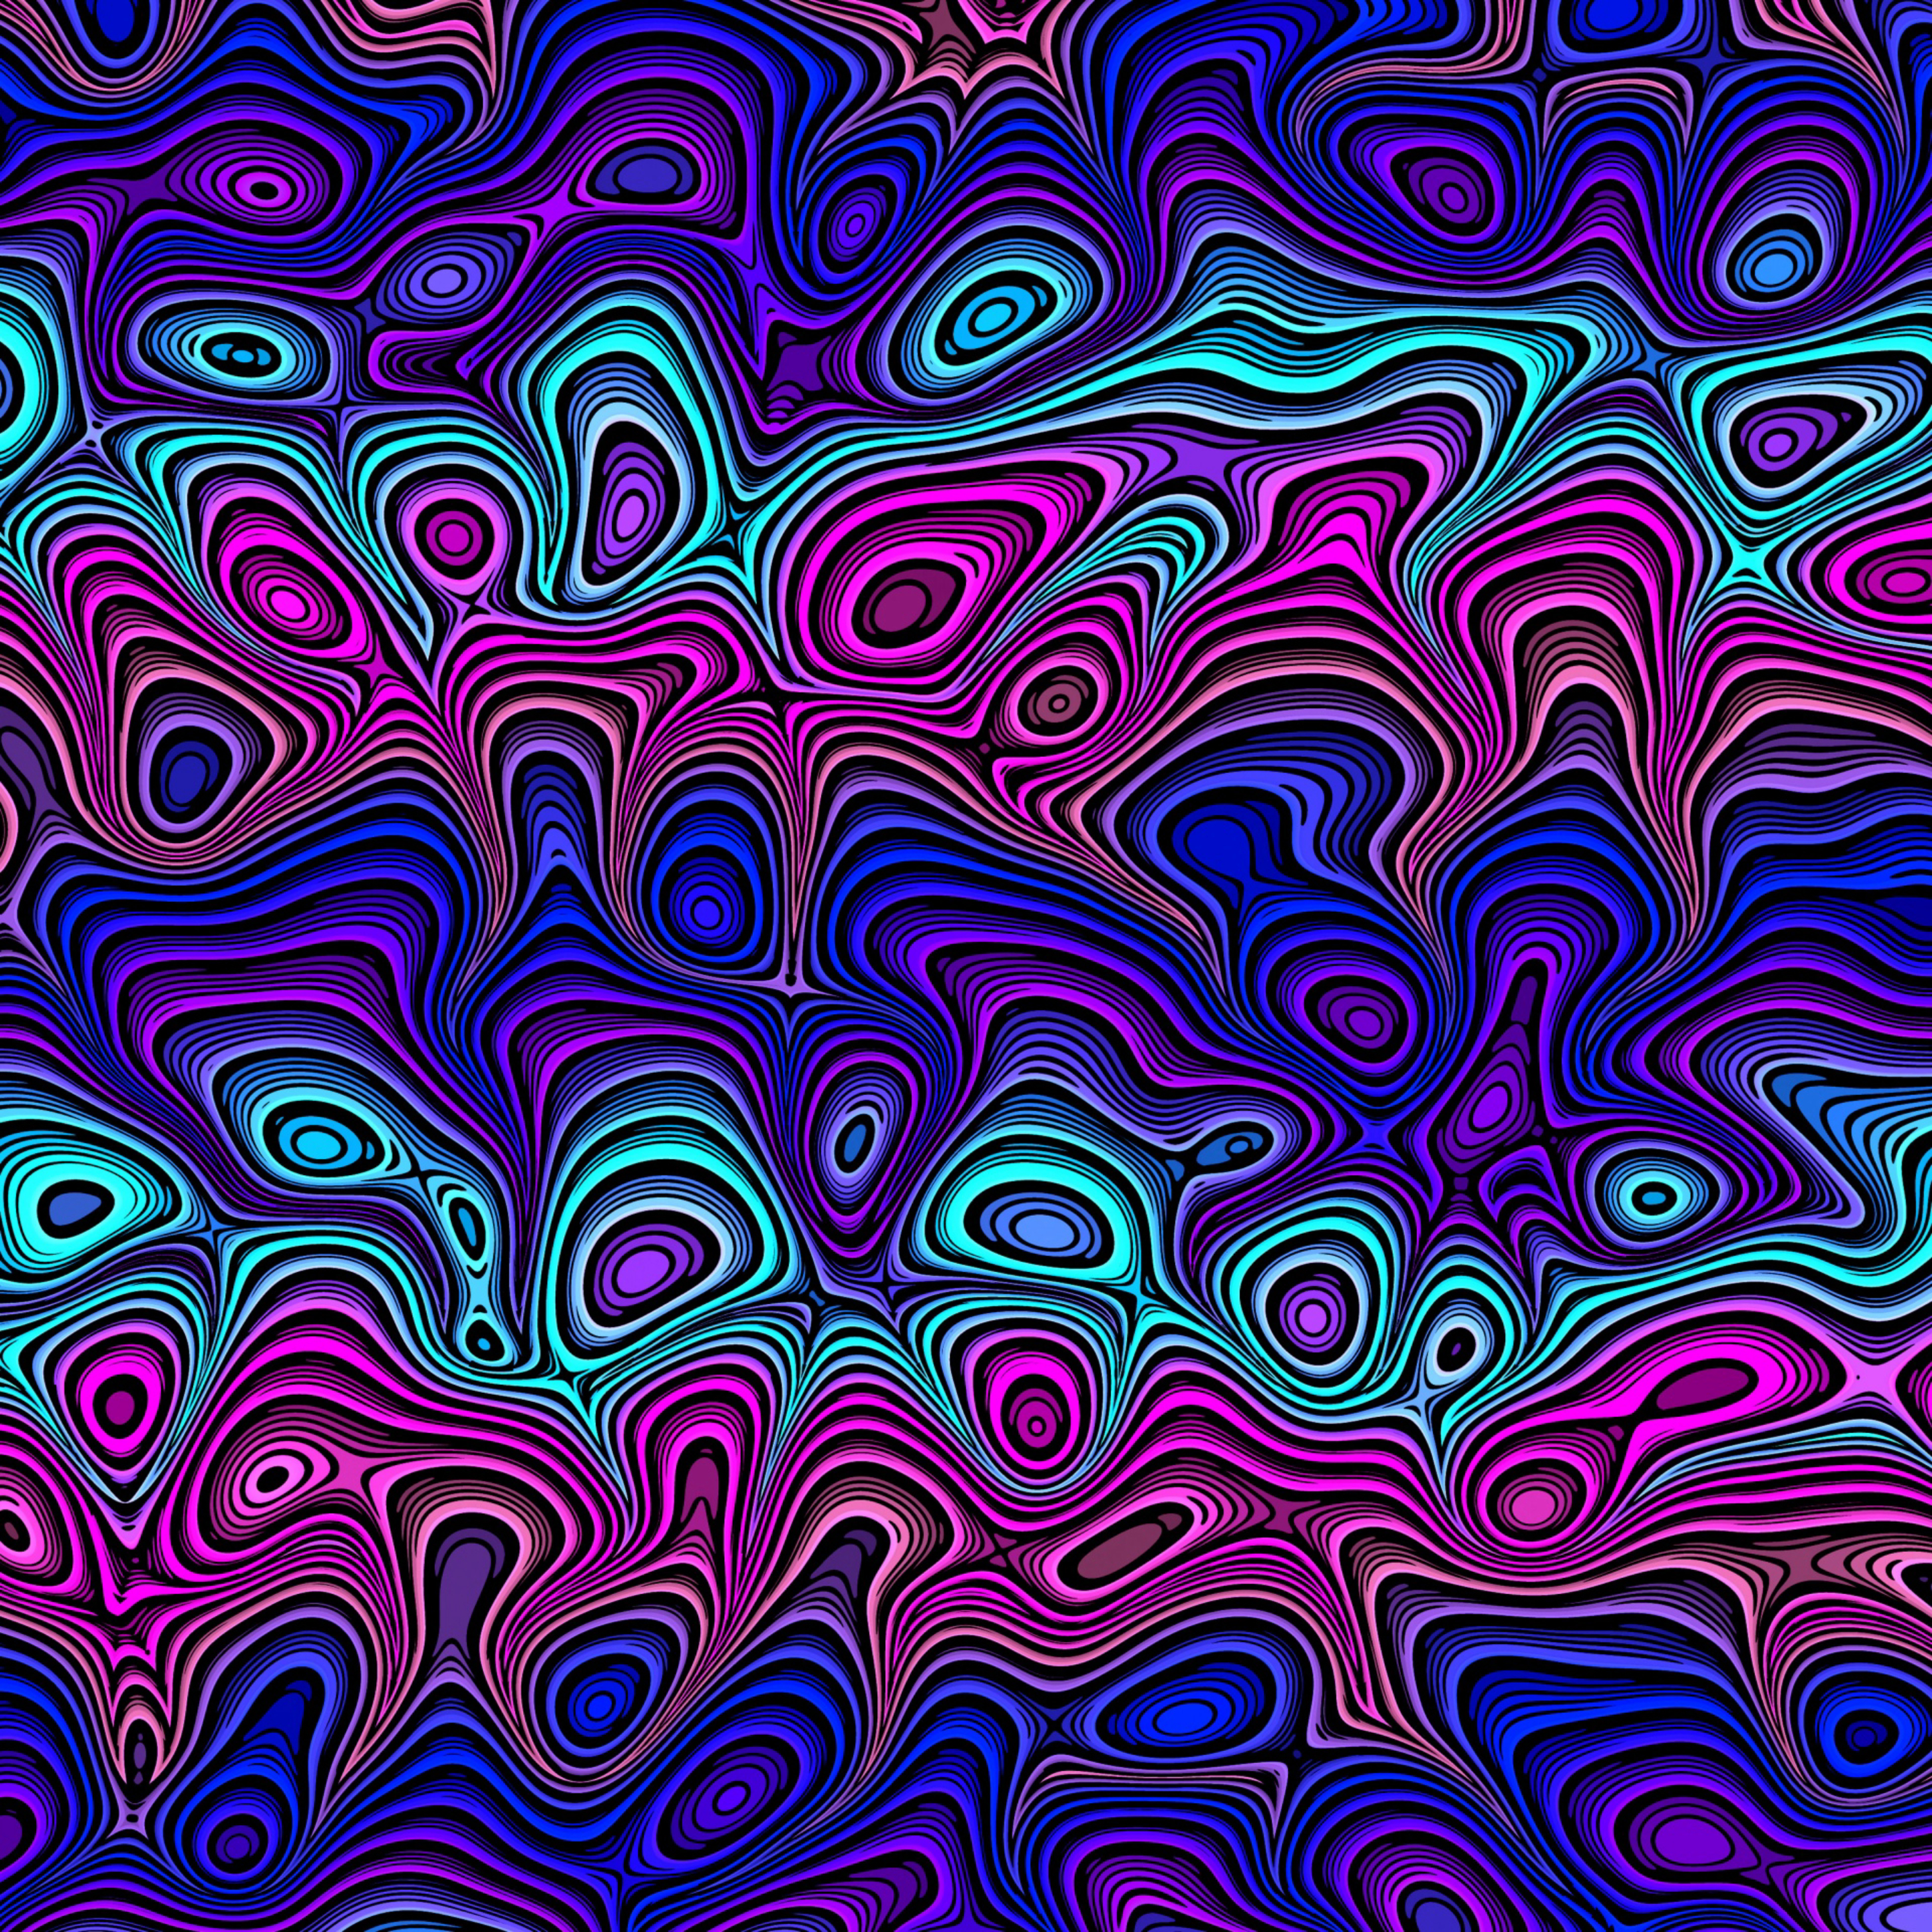 motley, multicolored, lines, abstract, wavy, swirling, involute